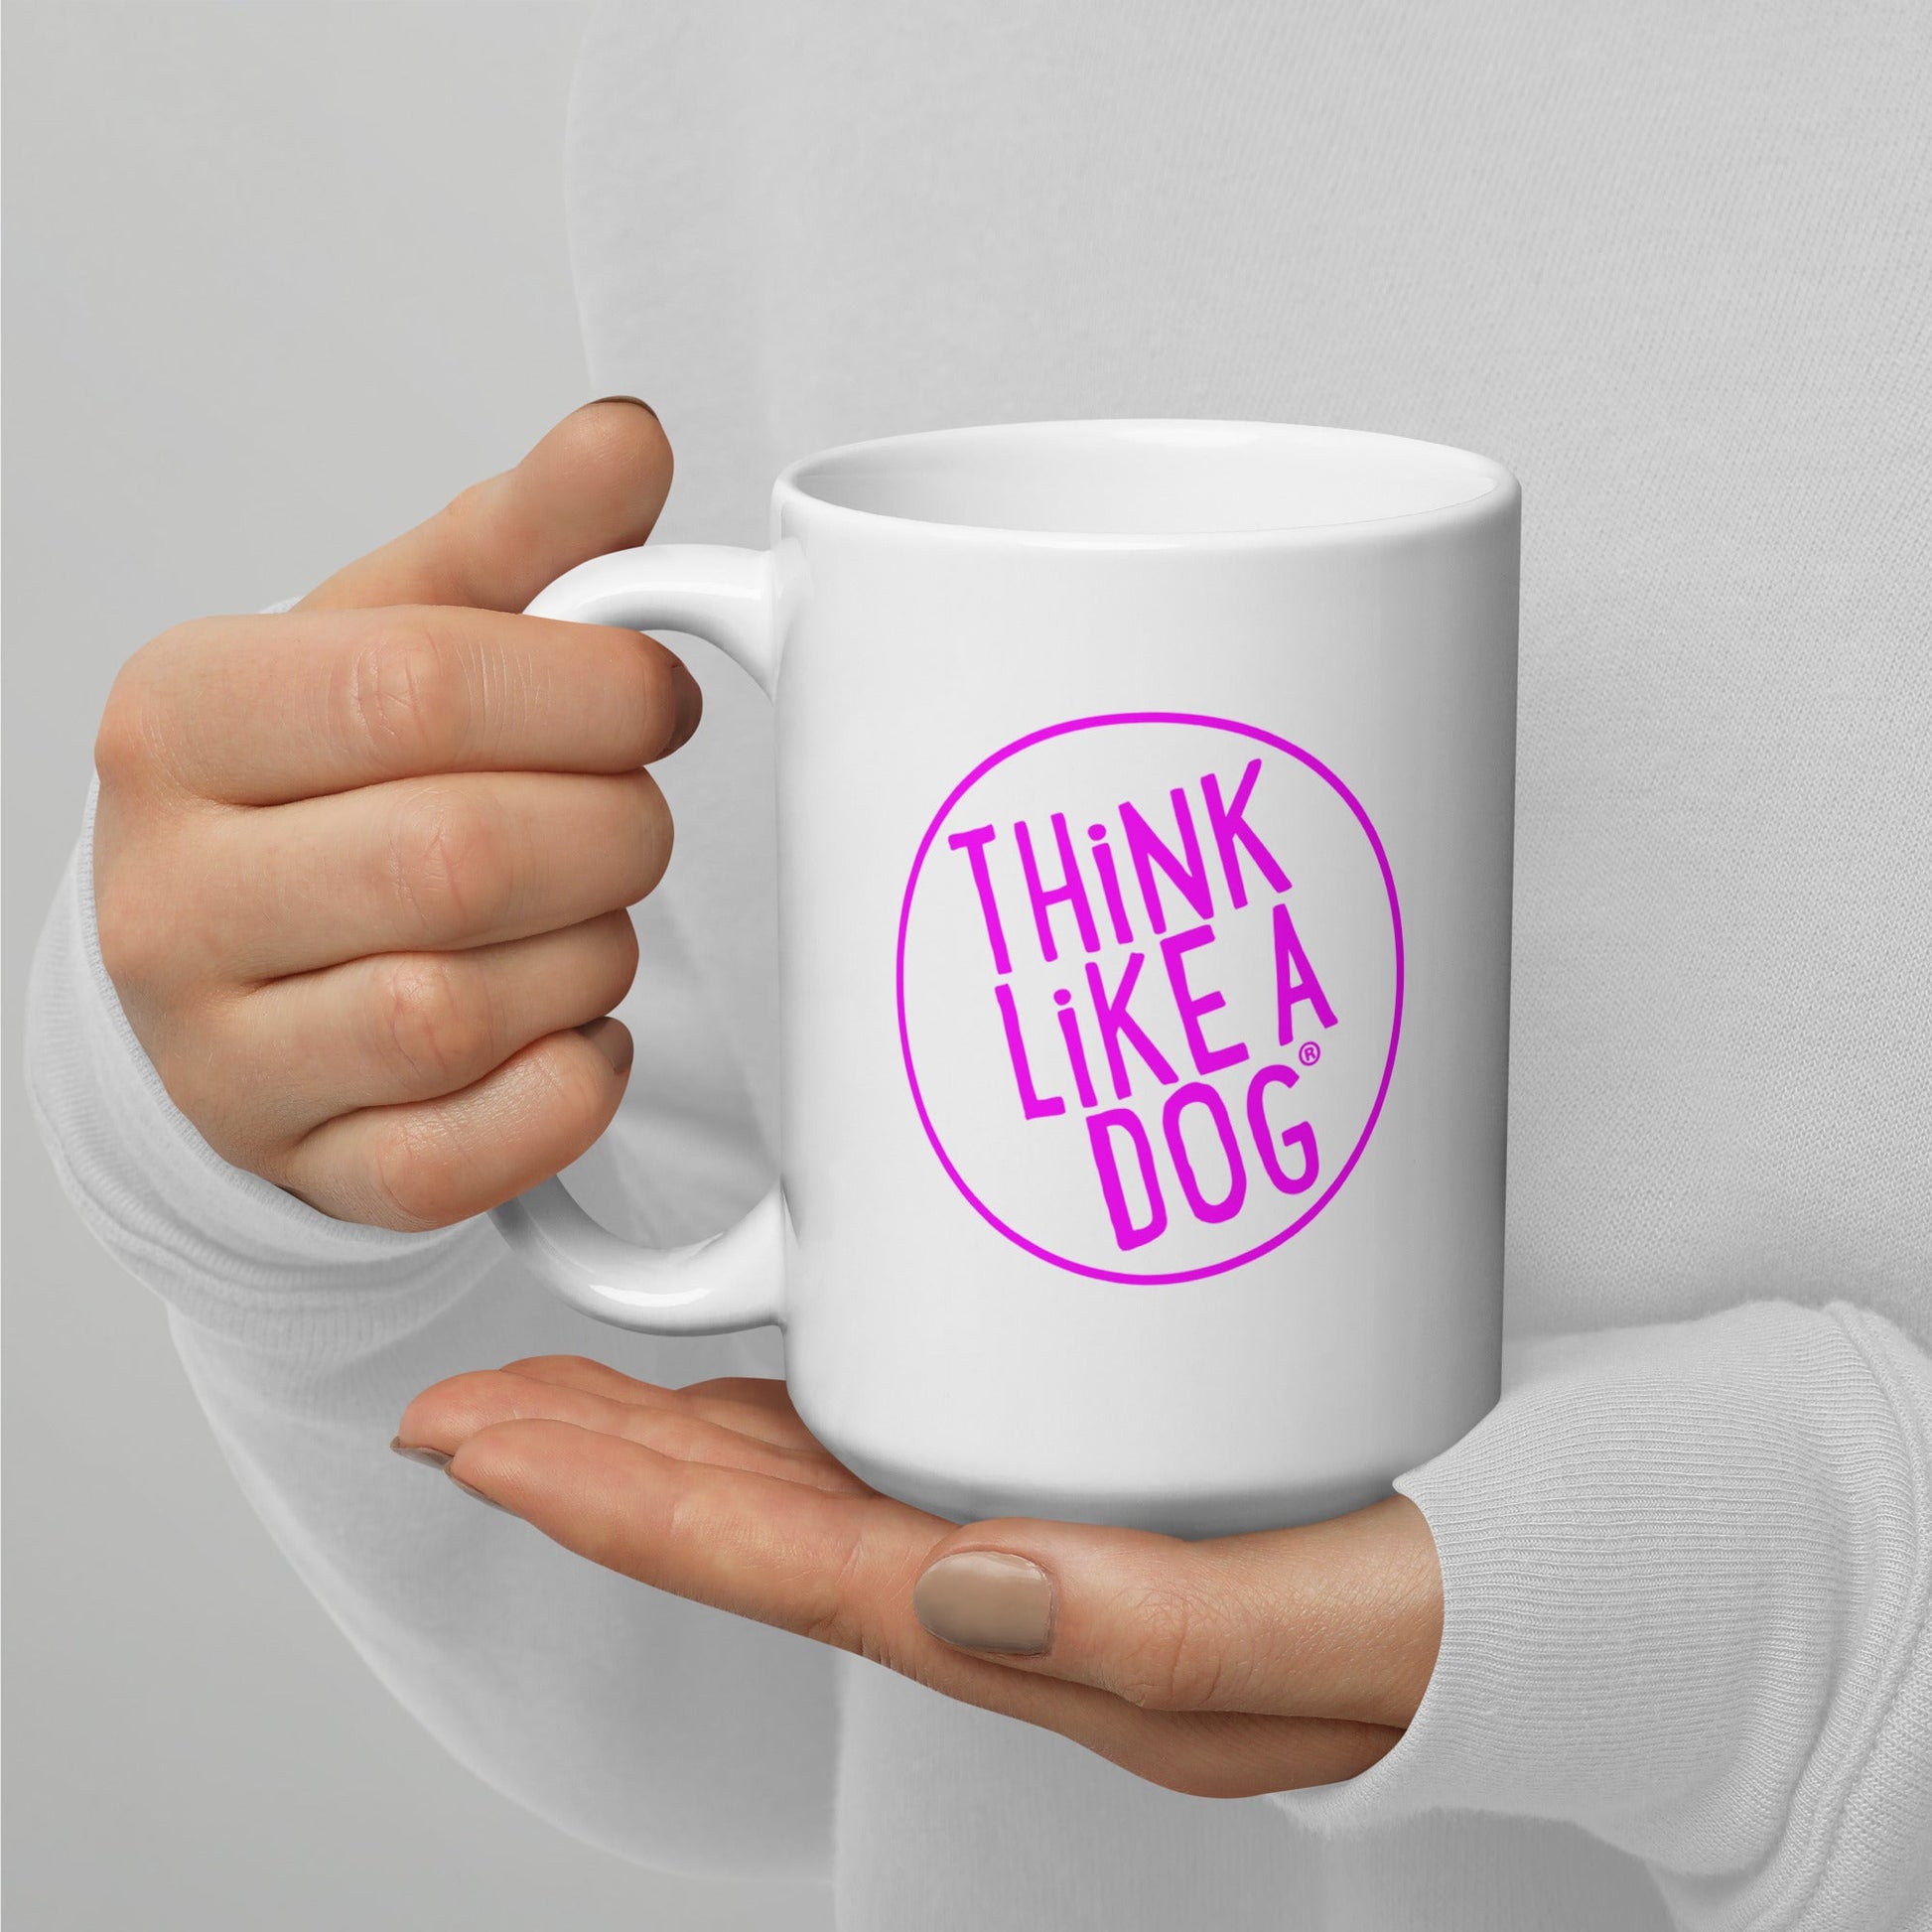 Person holding a White Glossy Mug Magenta THiNK LiKE A DOG® Logo with the text "THiNK LiKE A DOG®" printed on it.